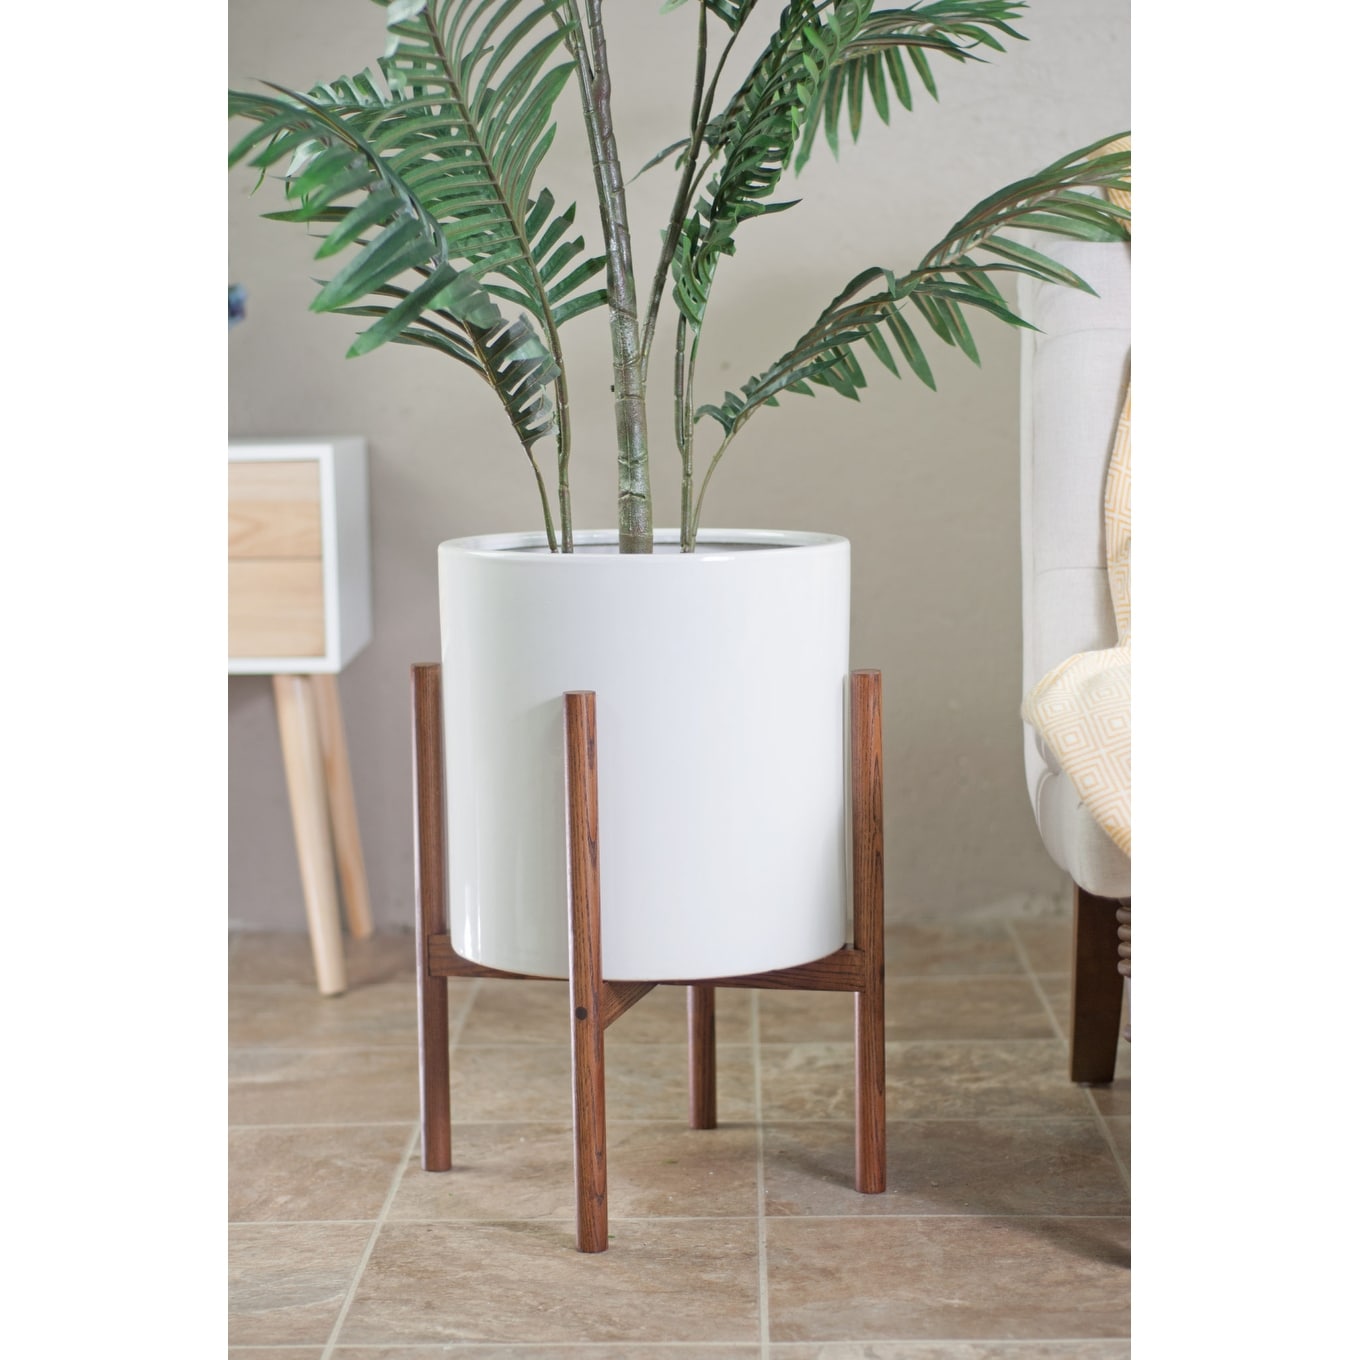 Mid Century Modern White Ceramic Planter With Wood Stand Overstock 28645702 White